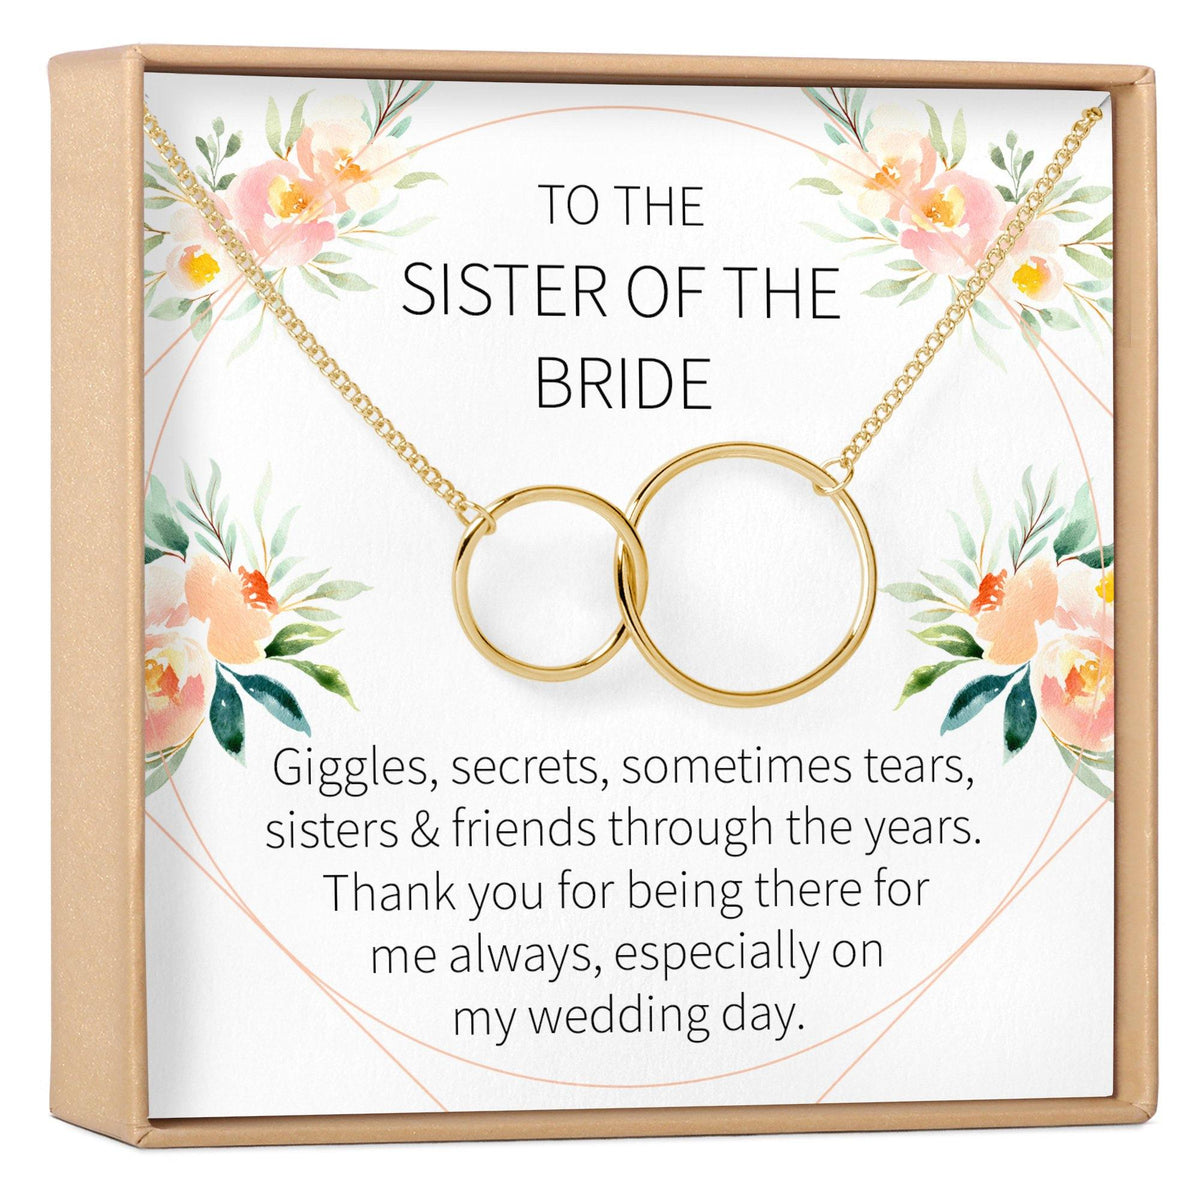 Sister of the Bride Necklace - Dear Ava, Jewelry / Necklaces / Pendants